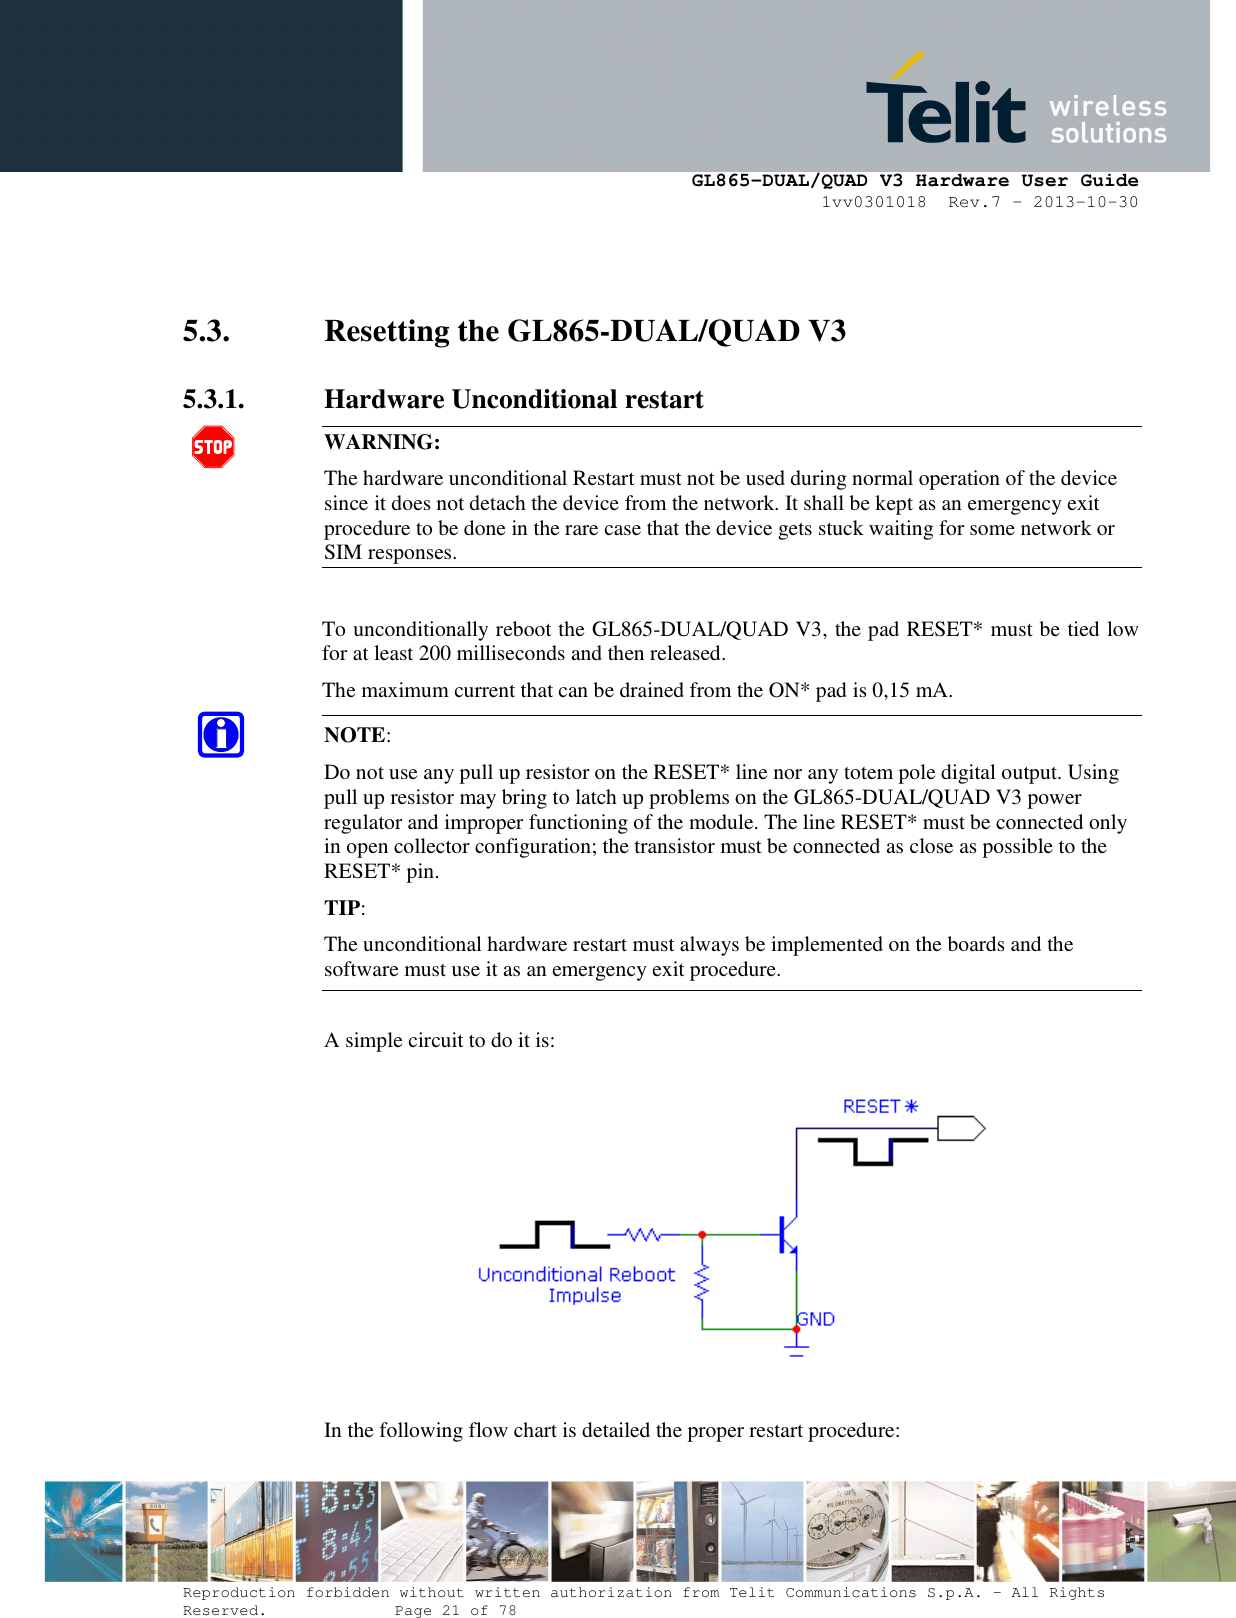      GL865-DUAL/QUAD V3 Hardware User Guide 1vv0301018  Rev.7 – 2013-10-30  Reproduction forbidden without written authorization from Telit Communications S.p.A. - All Rights Reserved.    Page 21 of 78 Mod. 0805 2011-07 Rev.2   5.3. Resetting the GL865-DUAL/QUAD V3 5.3.1. Hardware Unconditional restart  WARNING: The hardware unconditional Restart must not be used during normal operation of the device since it does not detach the device from the network. It shall be kept as an emergency exit procedure to be done in the rare case that the device gets stuck waiting for some network or SIM responses.  To unconditionally reboot the GL865-DUAL/QUAD V3, the pad RESET* must be tied low for at least 200 milliseconds and then released. The maximum current that can be drained from the ON* pad is 0,15 mA. NOTE:  Do not use any pull up resistor on the RESET* line nor any totem pole digital output. Using pull up resistor may bring to latch up problems on the GL865-DUAL/QUAD V3 power regulator and improper functioning of the module. The line RESET* must be connected only in open collector configuration; the transistor must be connected as close as possible to the RESET* pin. TIP: The unconditional hardware restart must always be implemented on the boards and the software must use it as an emergency exit procedure.  A simple circuit to do it is:    In the following flow chart is detailed the proper restart procedure:  